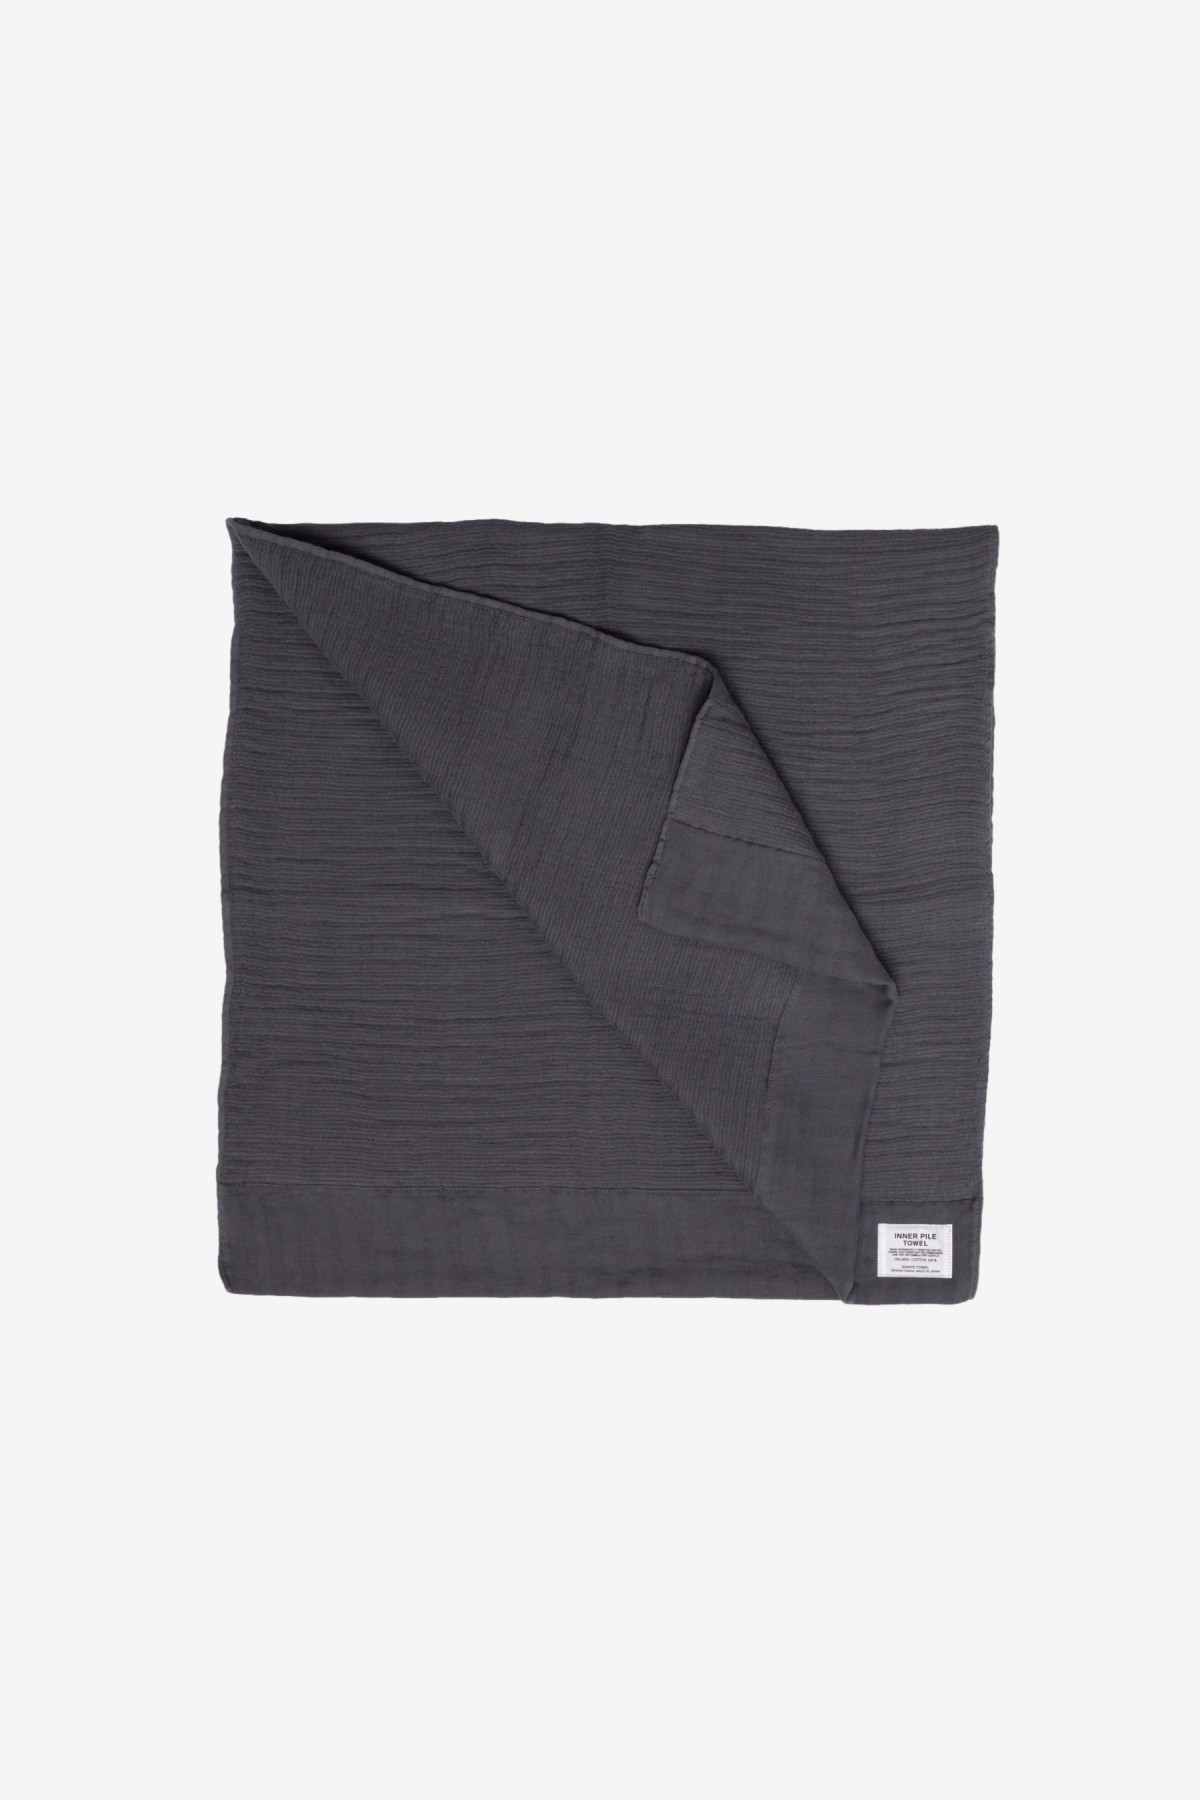 Shinto Inner Pile Bath Towel in Charcoal